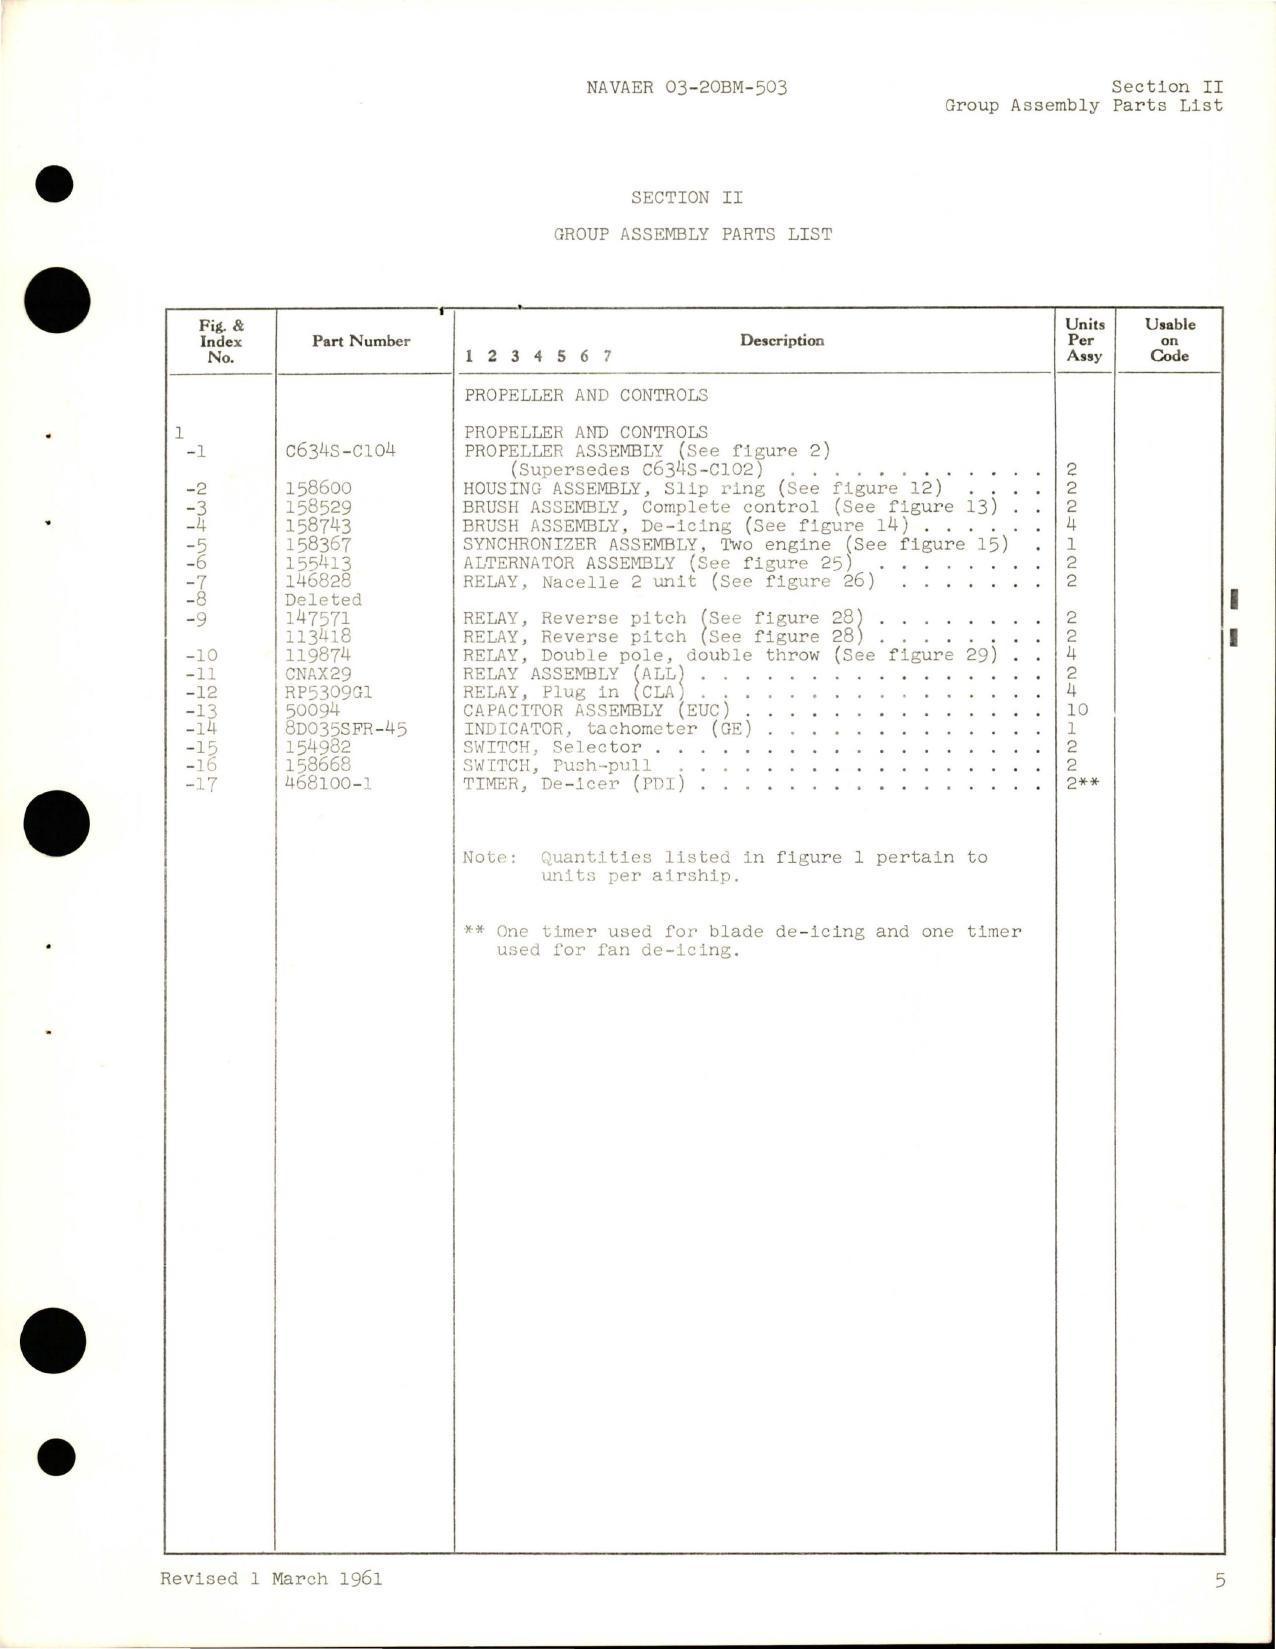 Sample page 9 from AirCorps Library document: Illustrated Parts Breakdown for Propeller and Controls - Model C634S-C104 